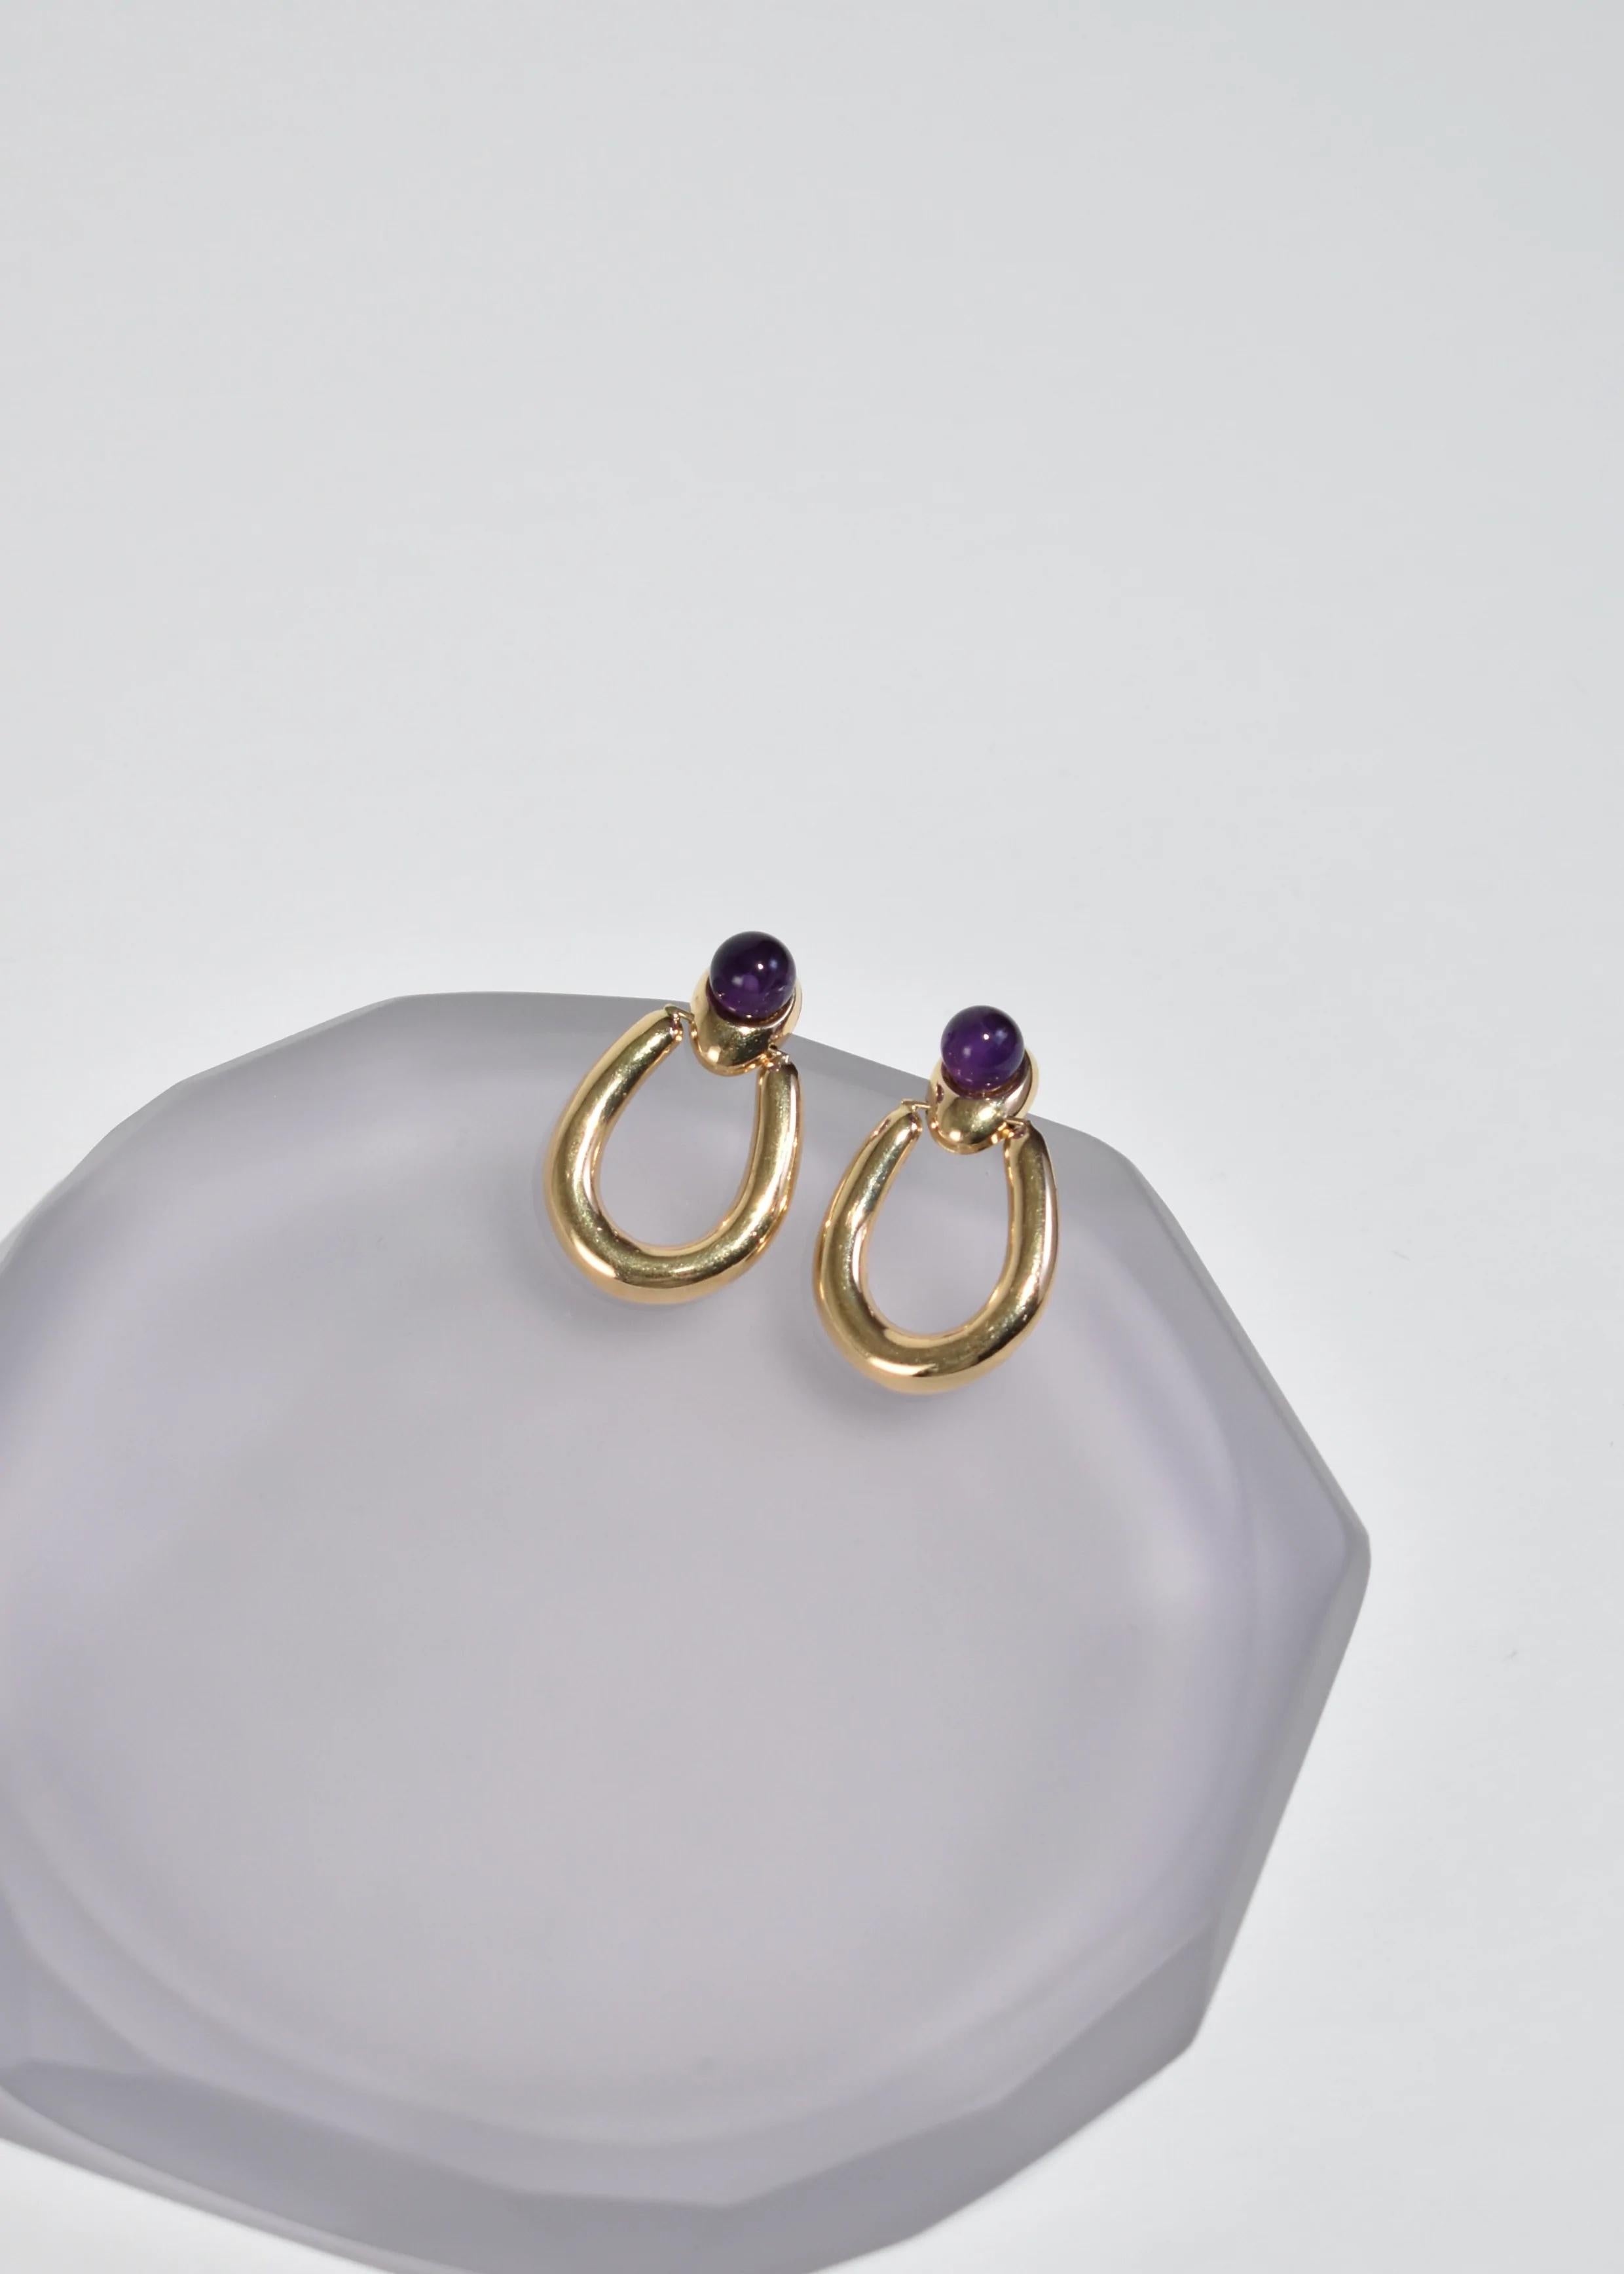 Cabochon Gold Amethyst Earrings For Sale